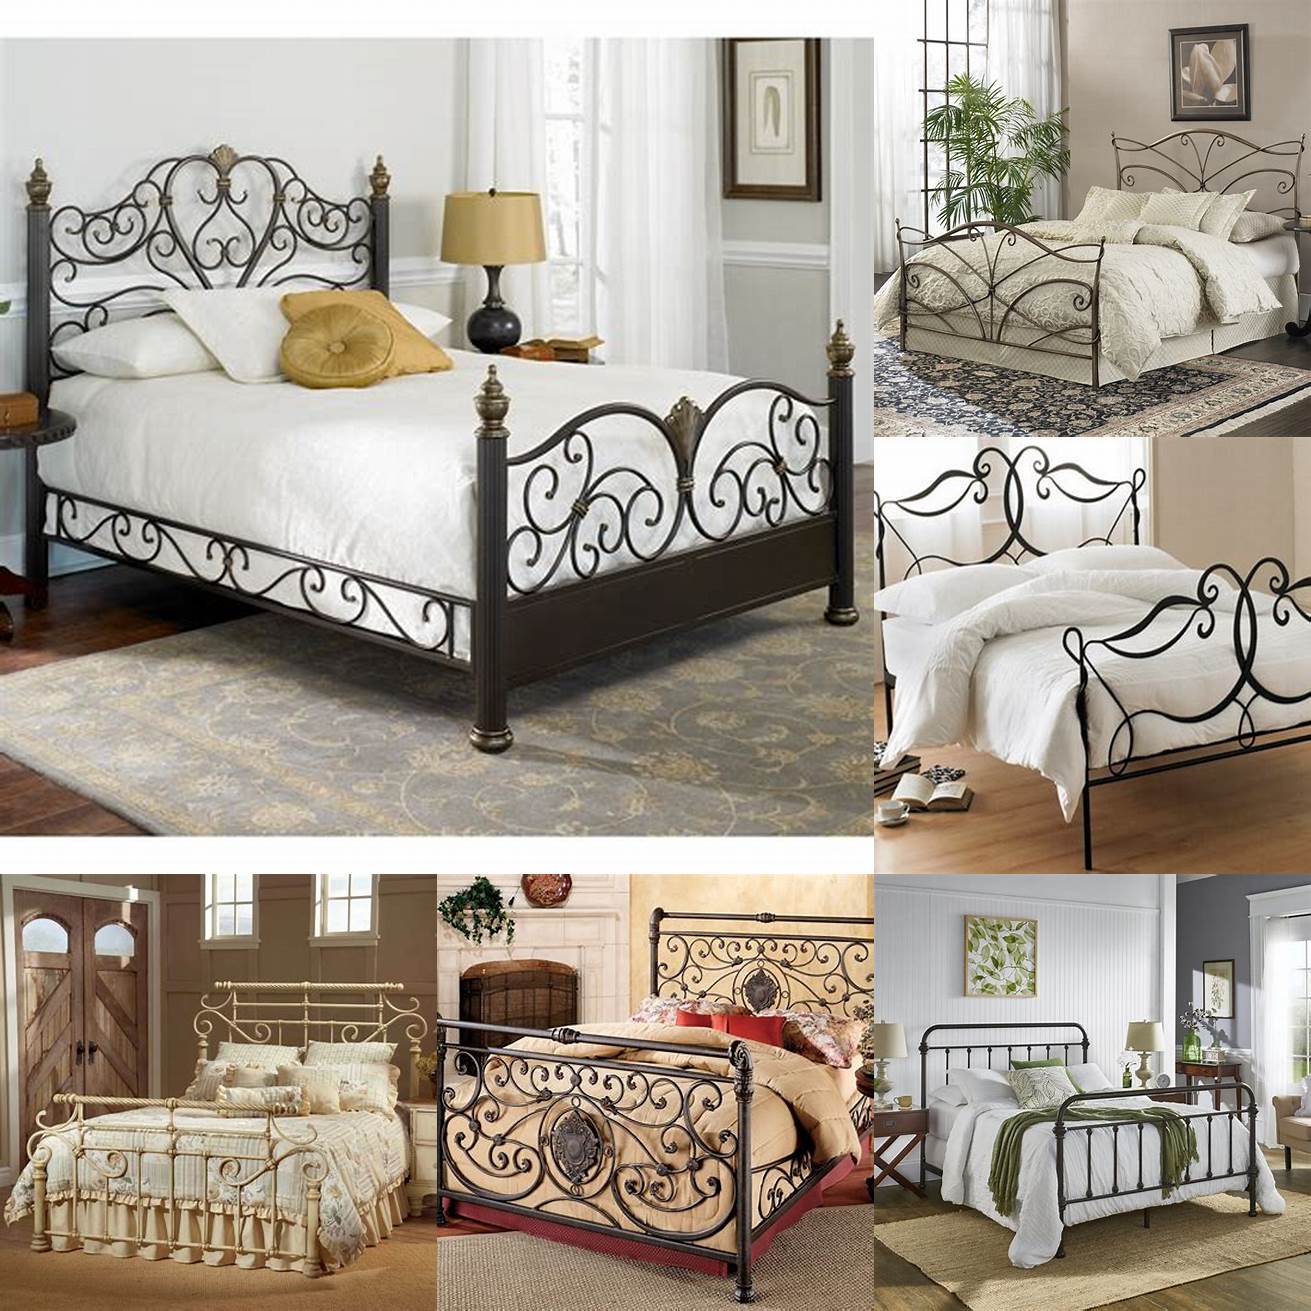 Elegance - Iron beds add a touch of elegance and sophistication to any room